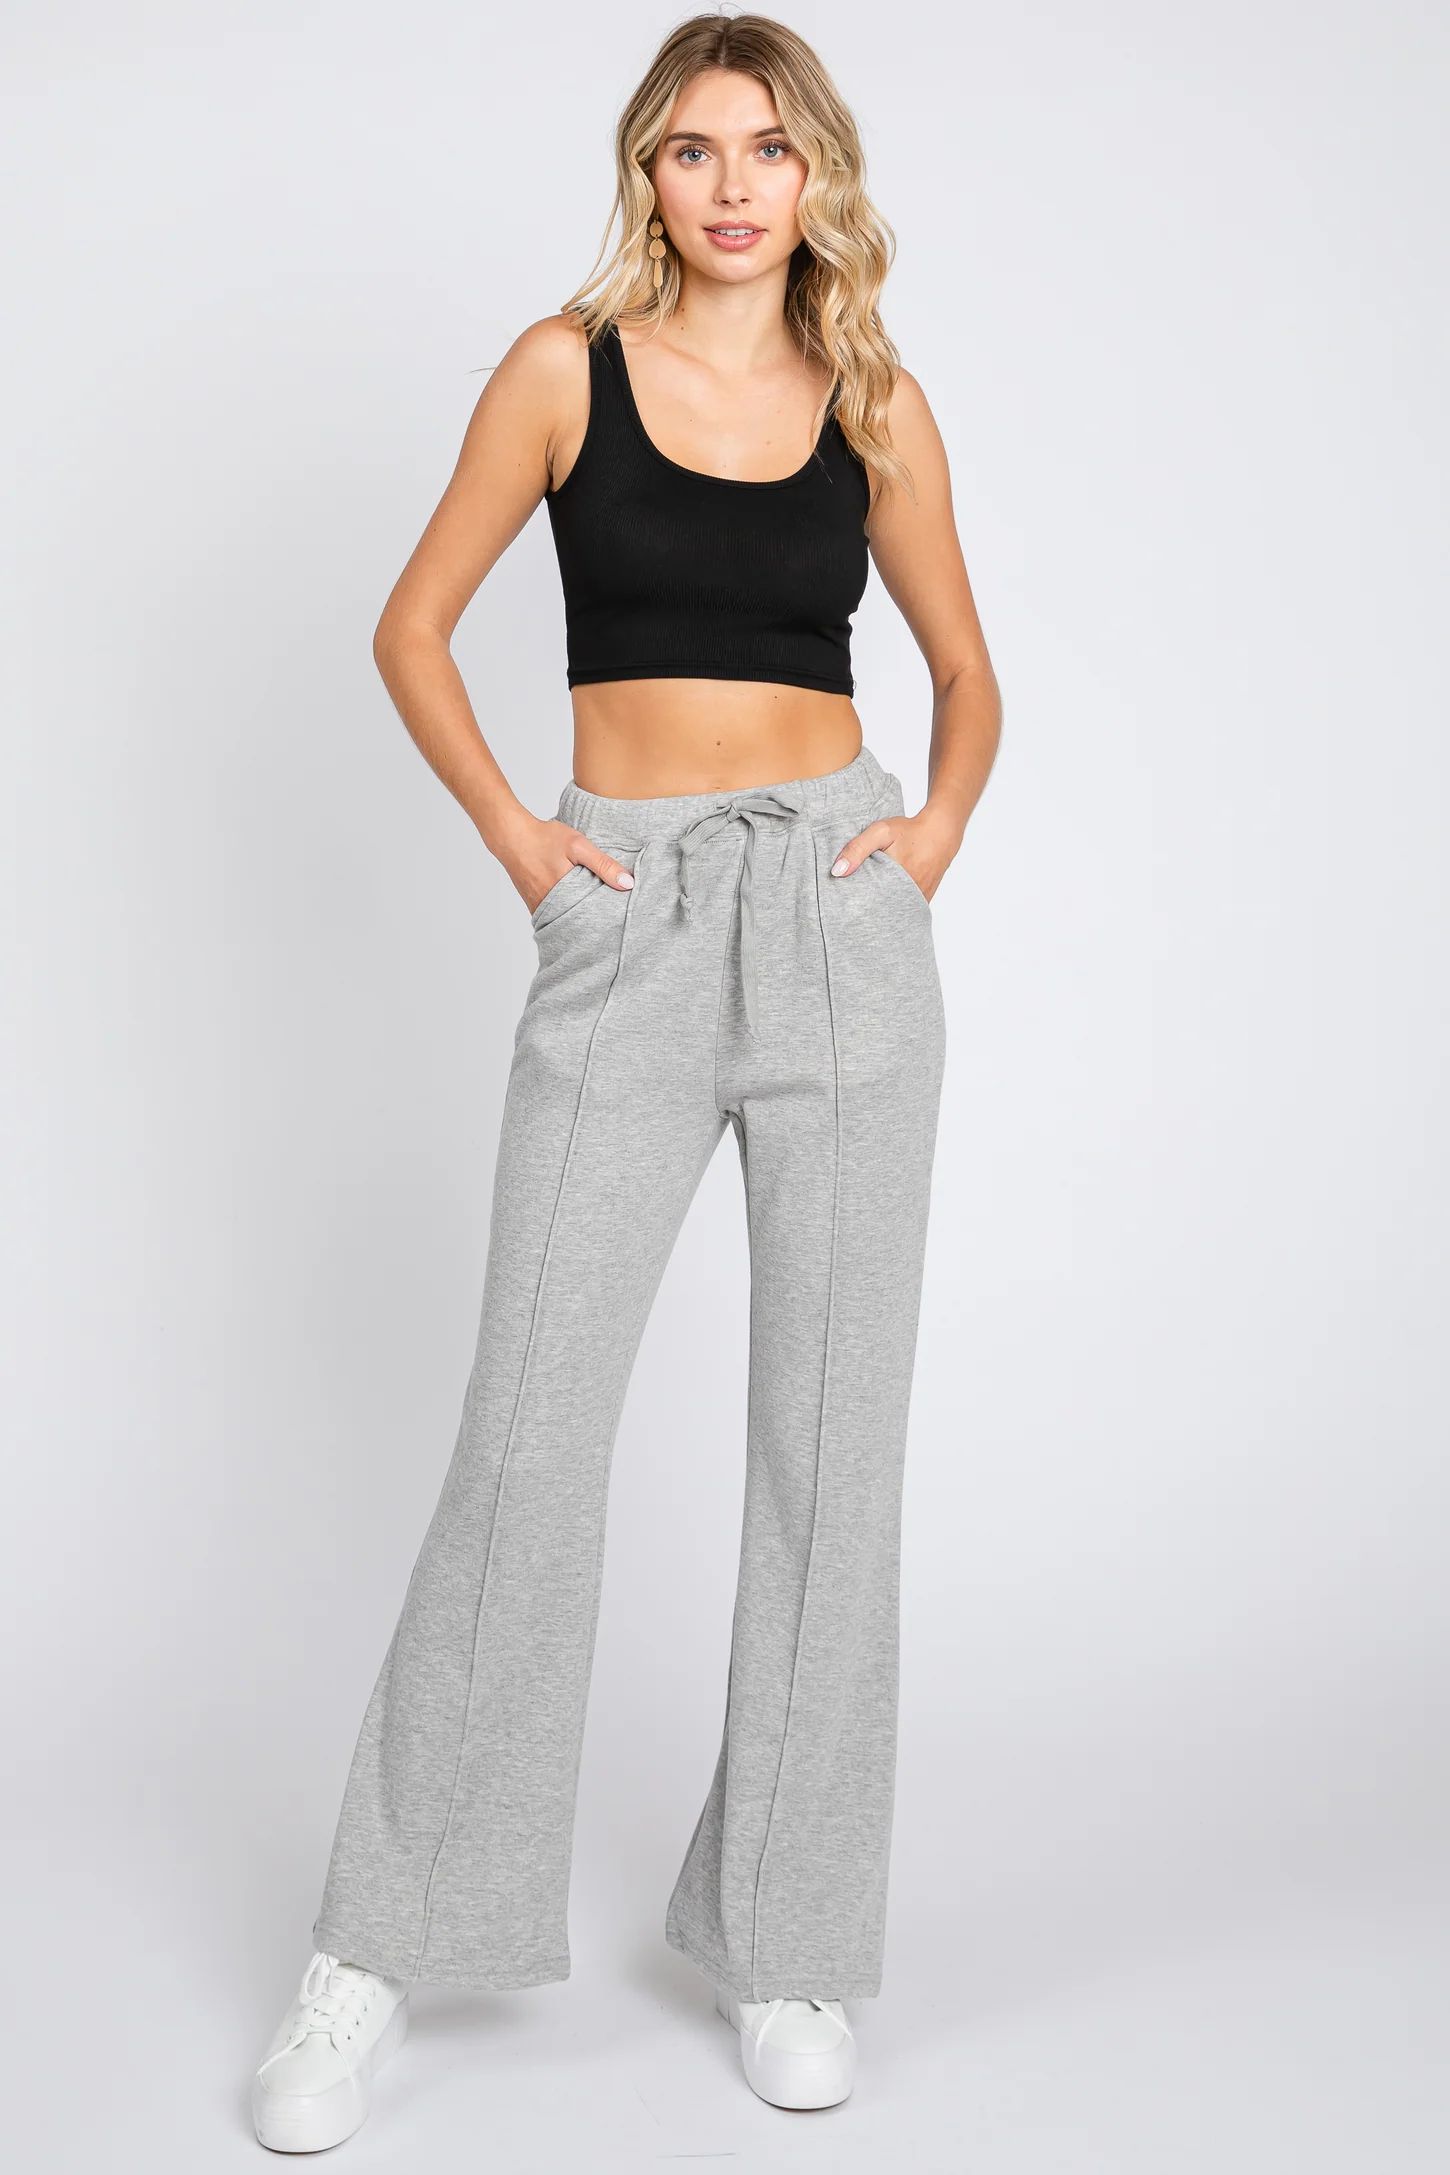 Heather Grey Faux Fur Lined Flare Lounge Pants | PinkBlush Maternity